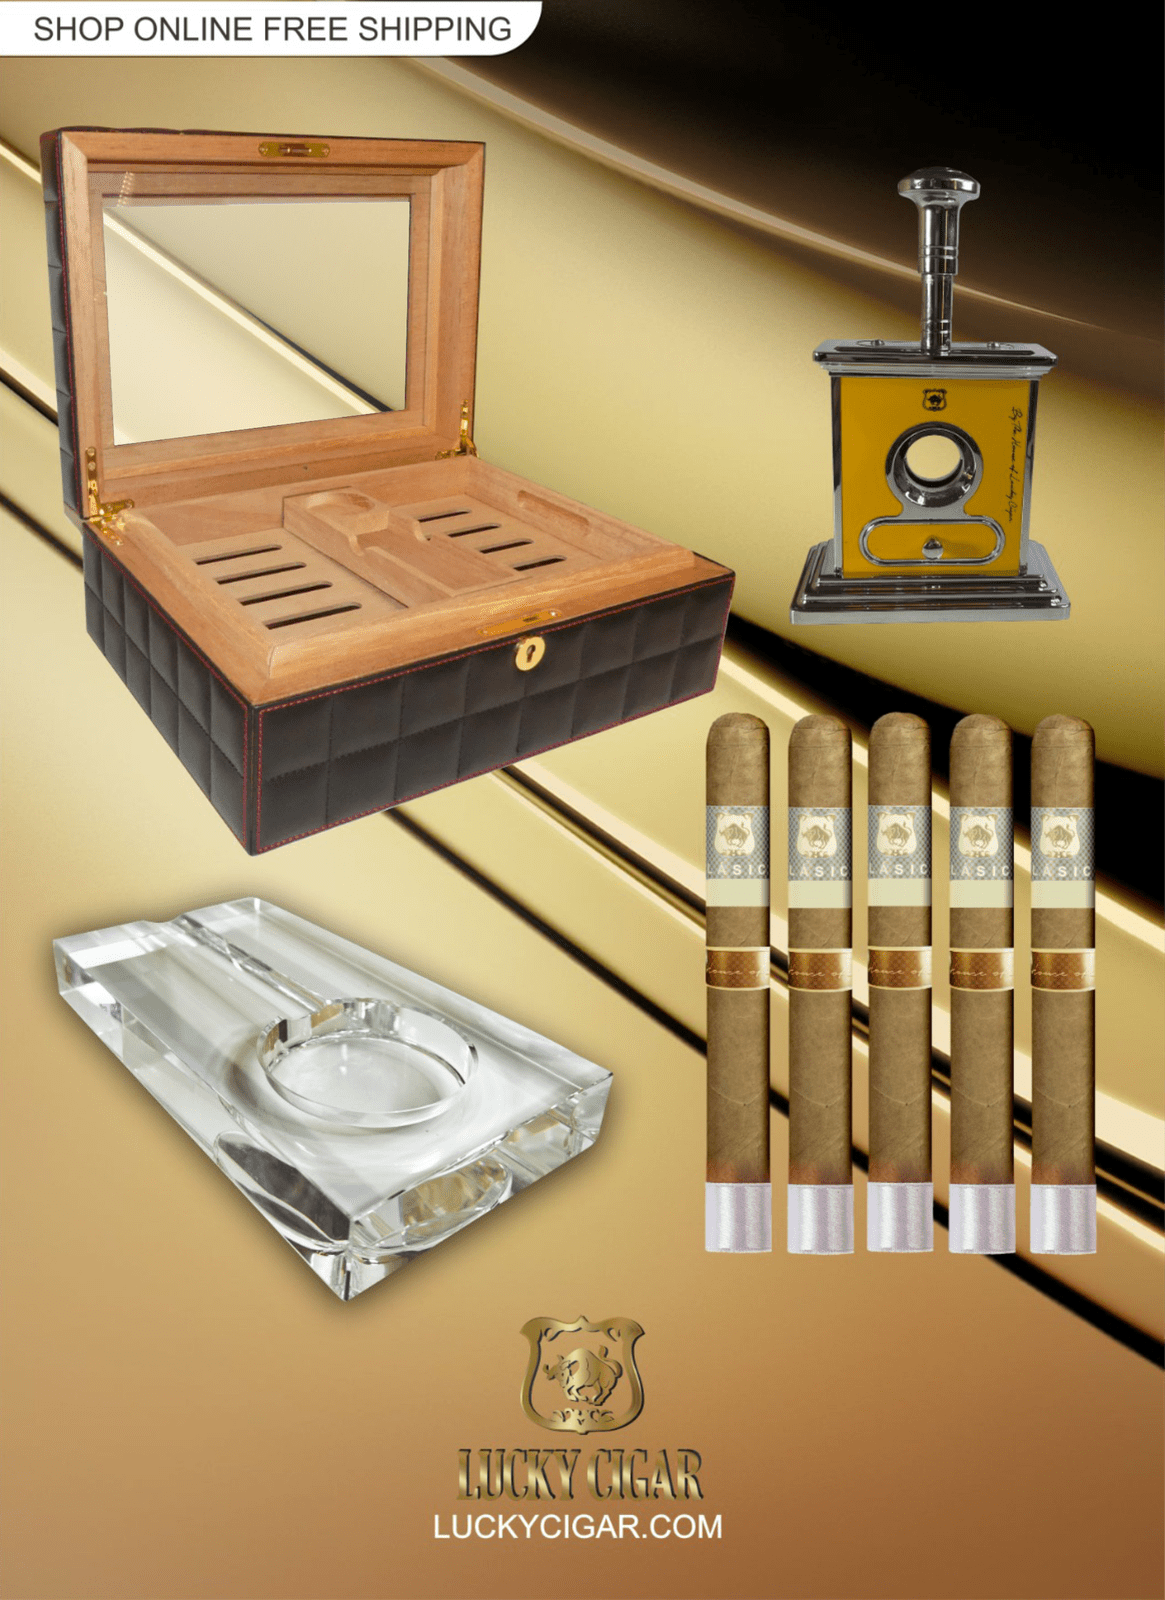 Lucky Cigar Sampler Sets: Set of 5 Classico Toro Cigars with Ashtray, Table Cutter, Desk Humidor